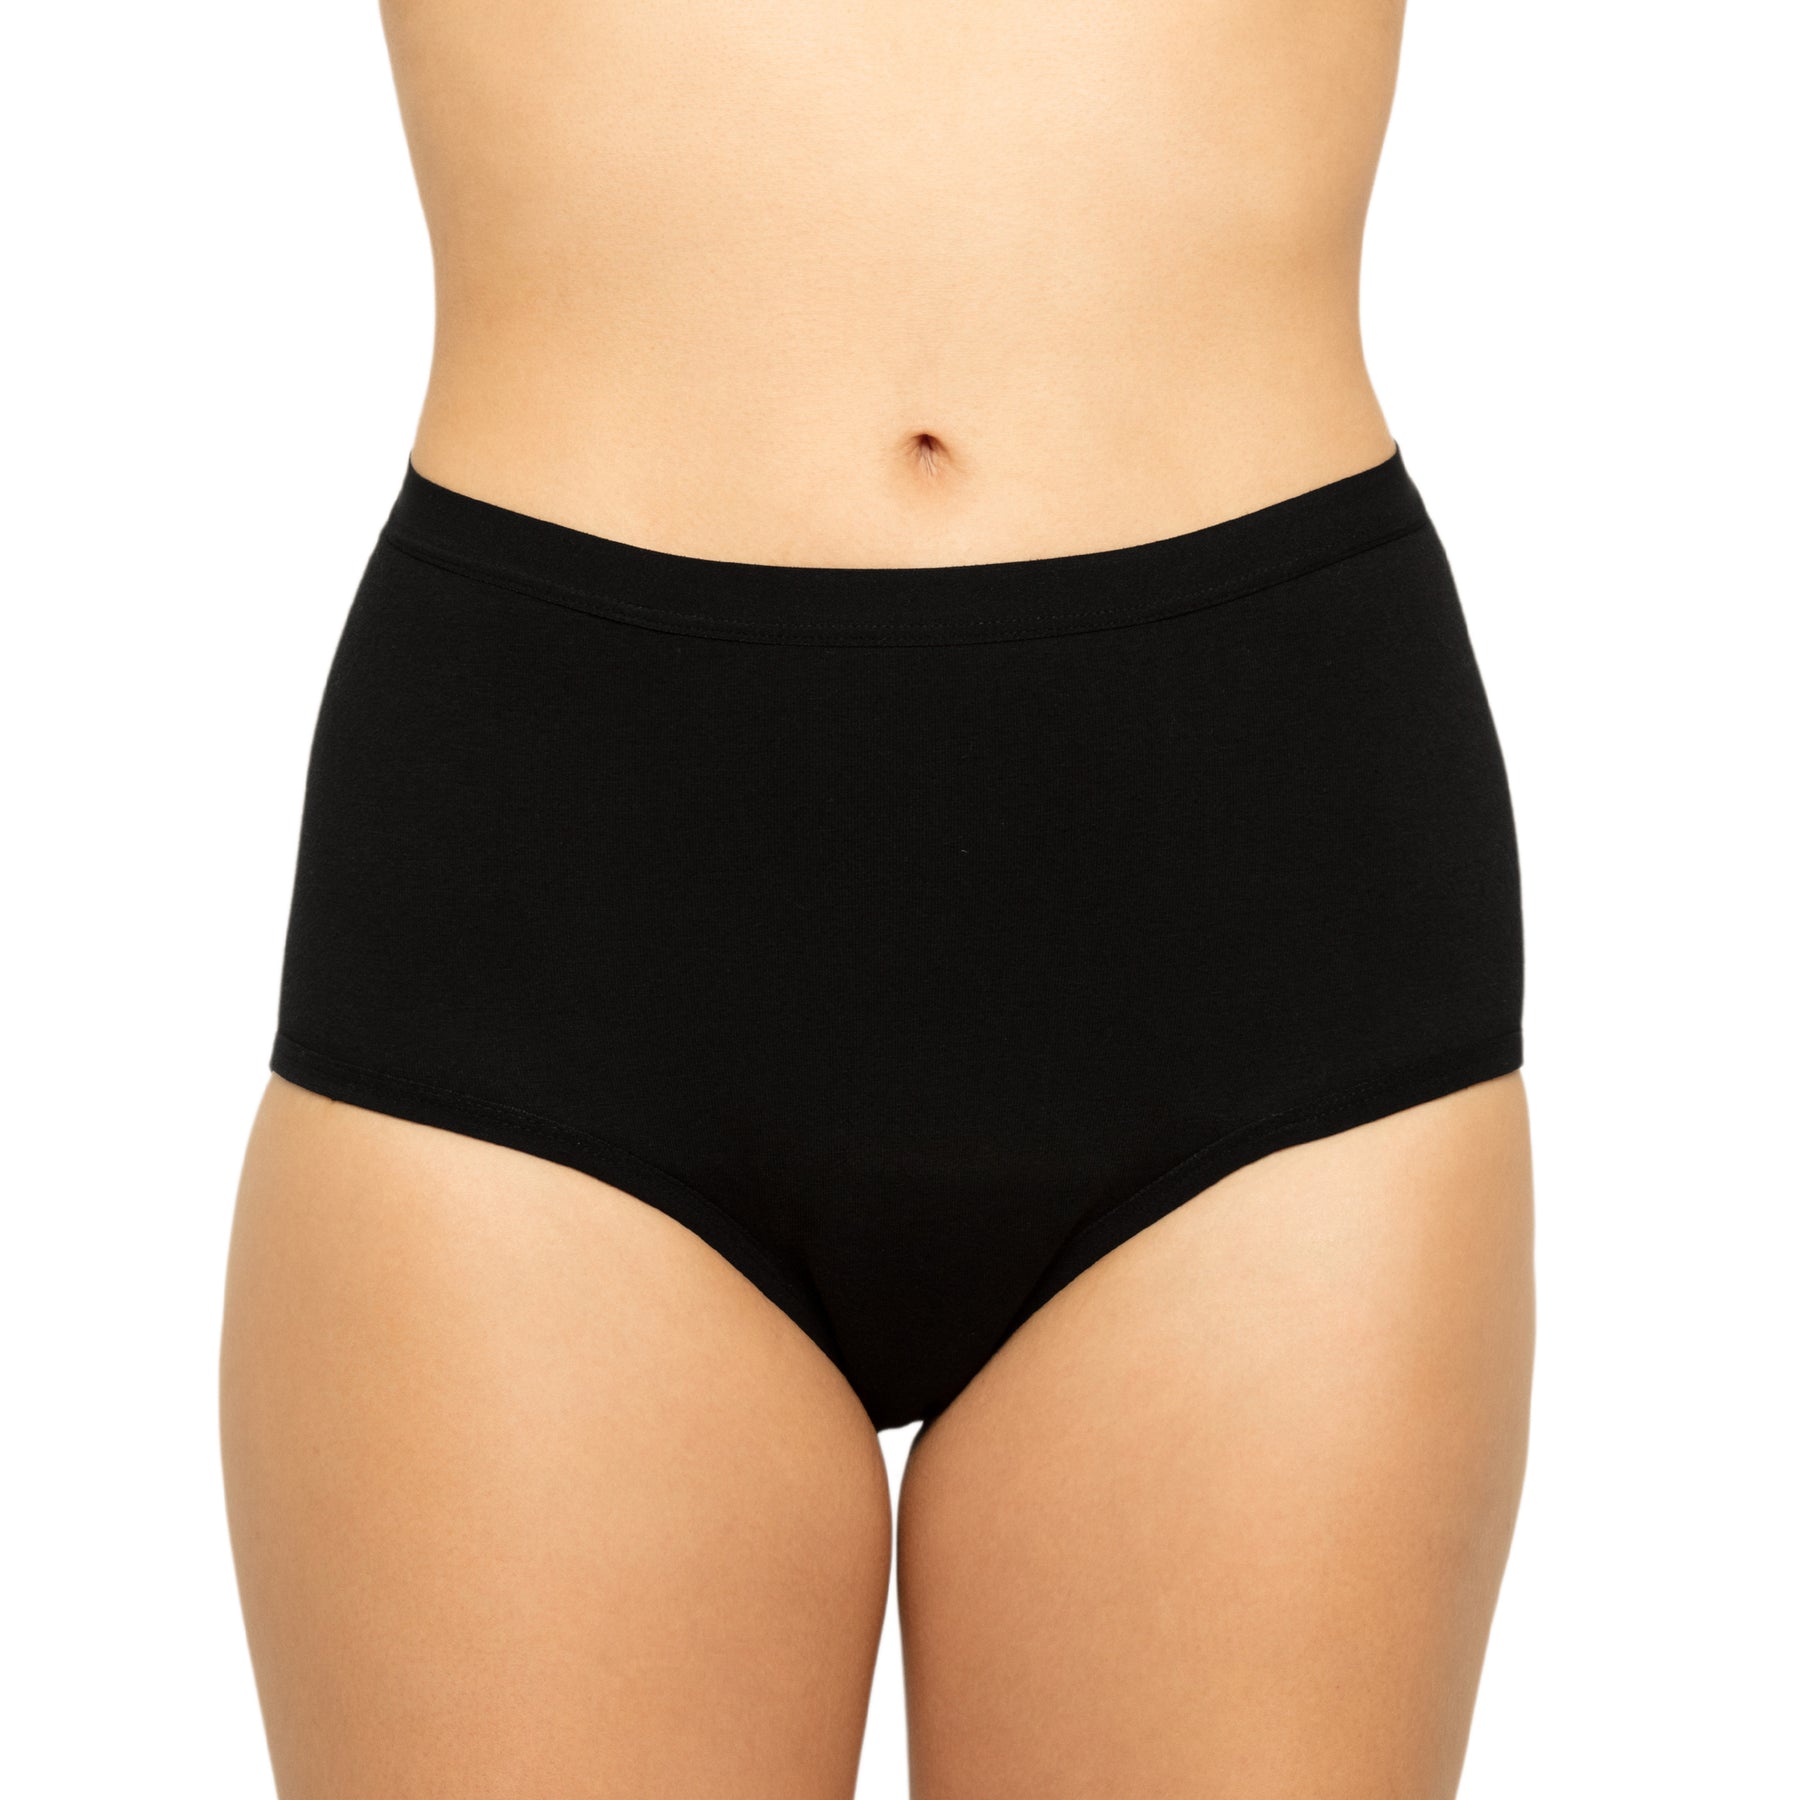 The Extra Coverage High Waisted Period. in Organic Cotton For Heavy Fl –  The Period Company